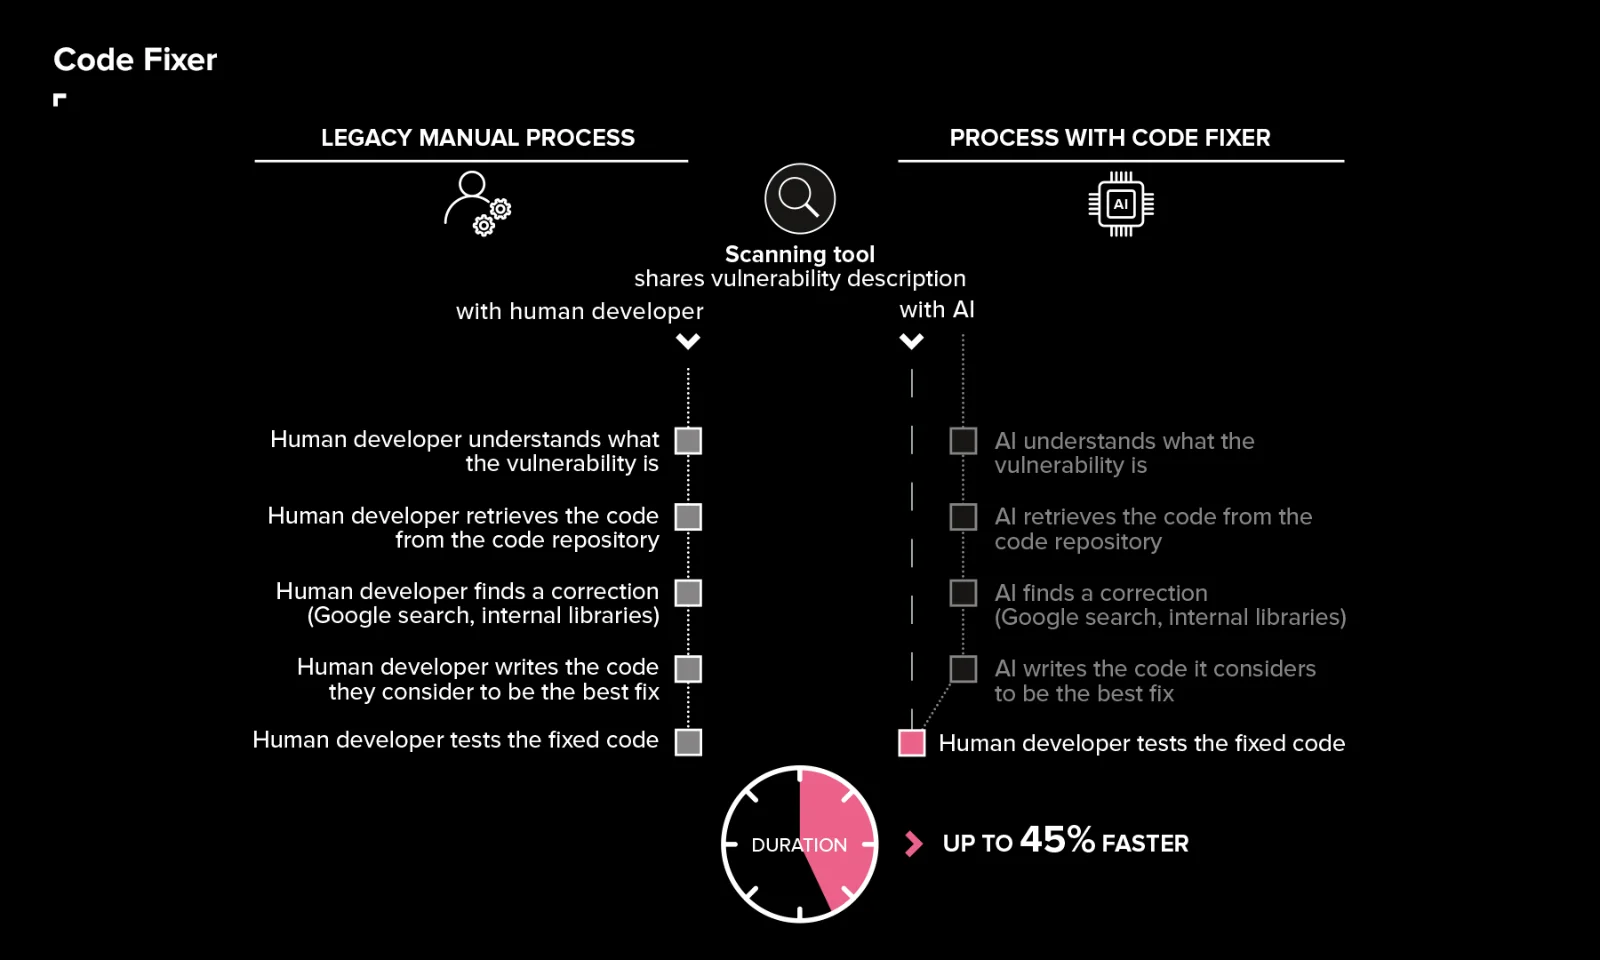 Discover how the AI Impact Code Fixer streamlines code vulnerability resolution. This infographic compares the traditional manual process with the AI-enhanced workflow, highlighting a time-saving of up to 45%. Ideal for developers and tech professionals seeking efficient coding solutions.